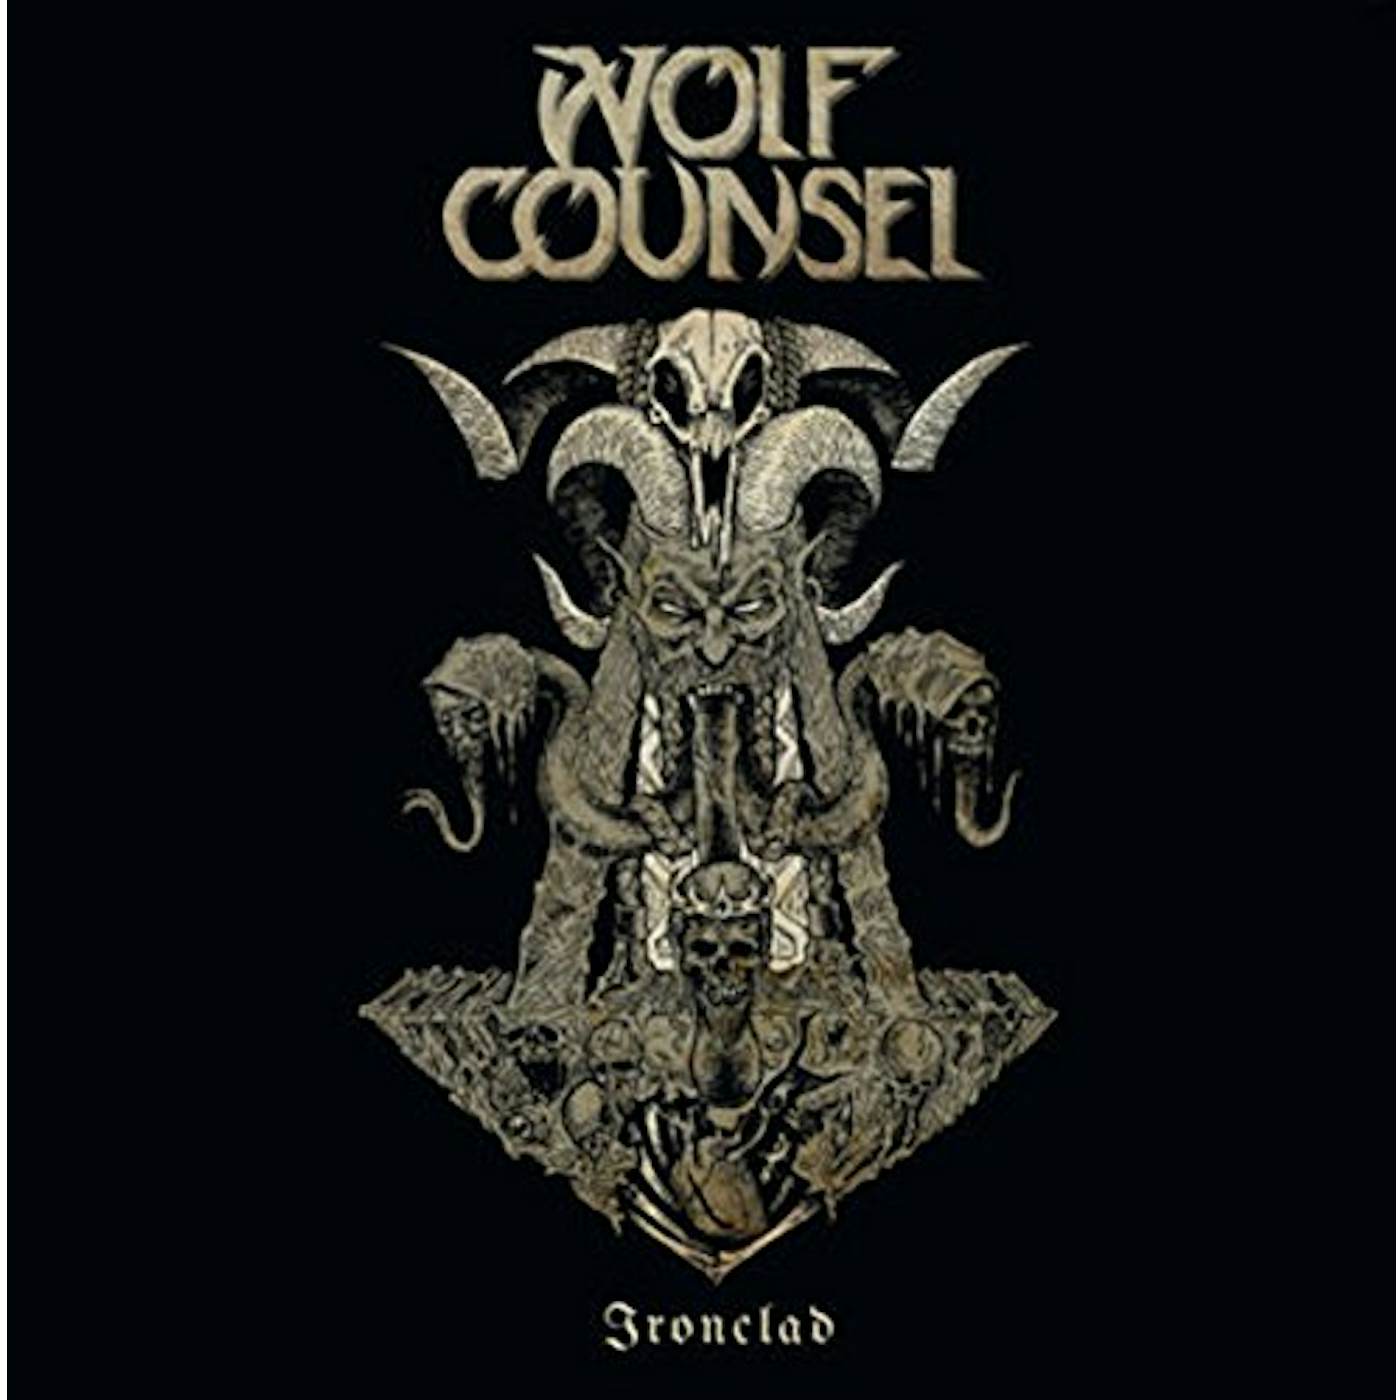 Wolf Counsel Ironclad Vinyl Record